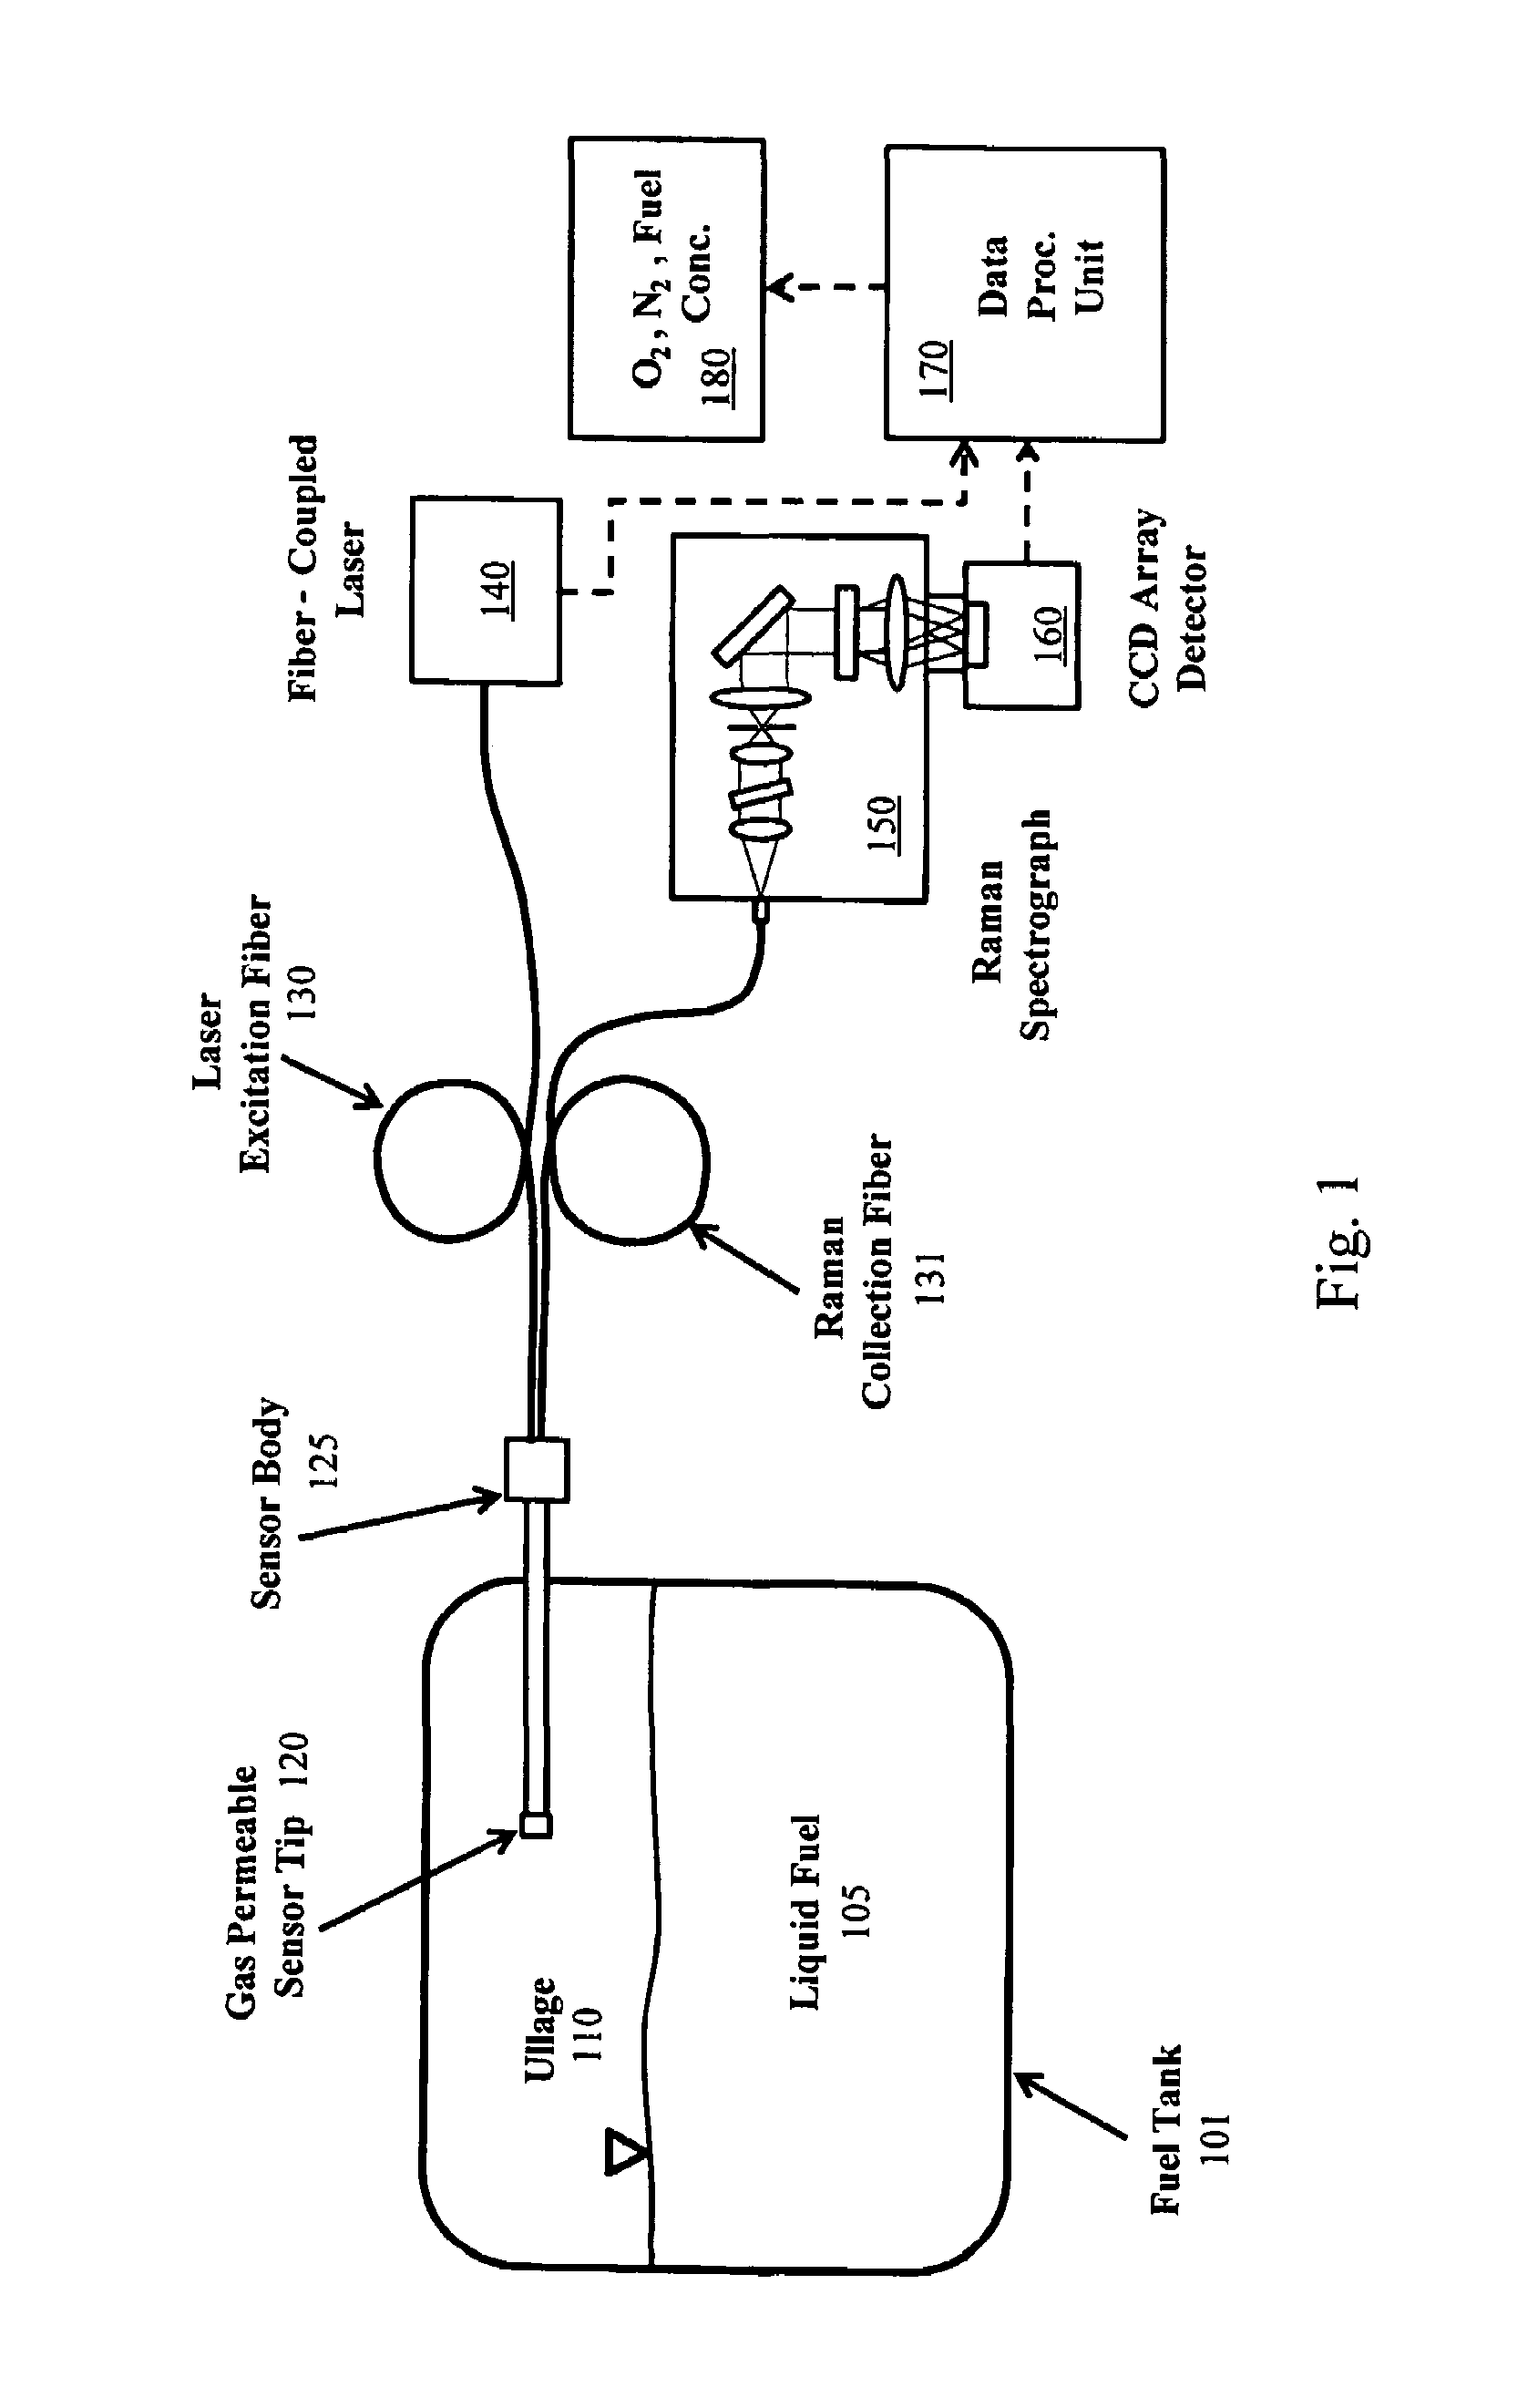 Method and system for fiber optic determination of gas concentrations in liquid receptacles